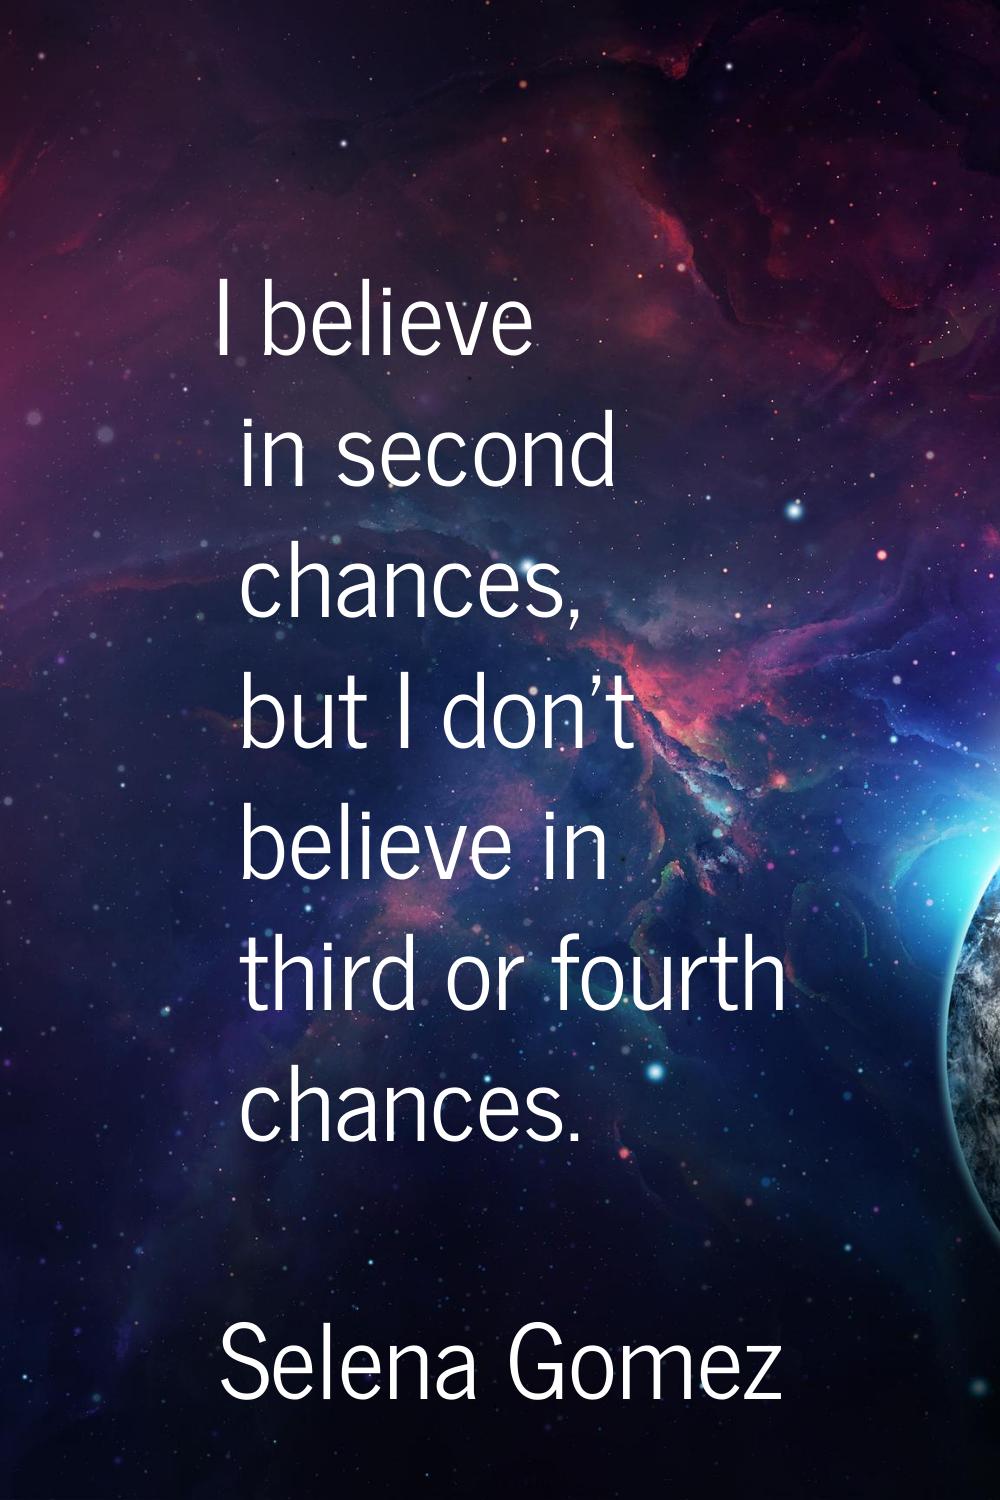 I believe in second chances, but I don't believe in third or fourth chances.